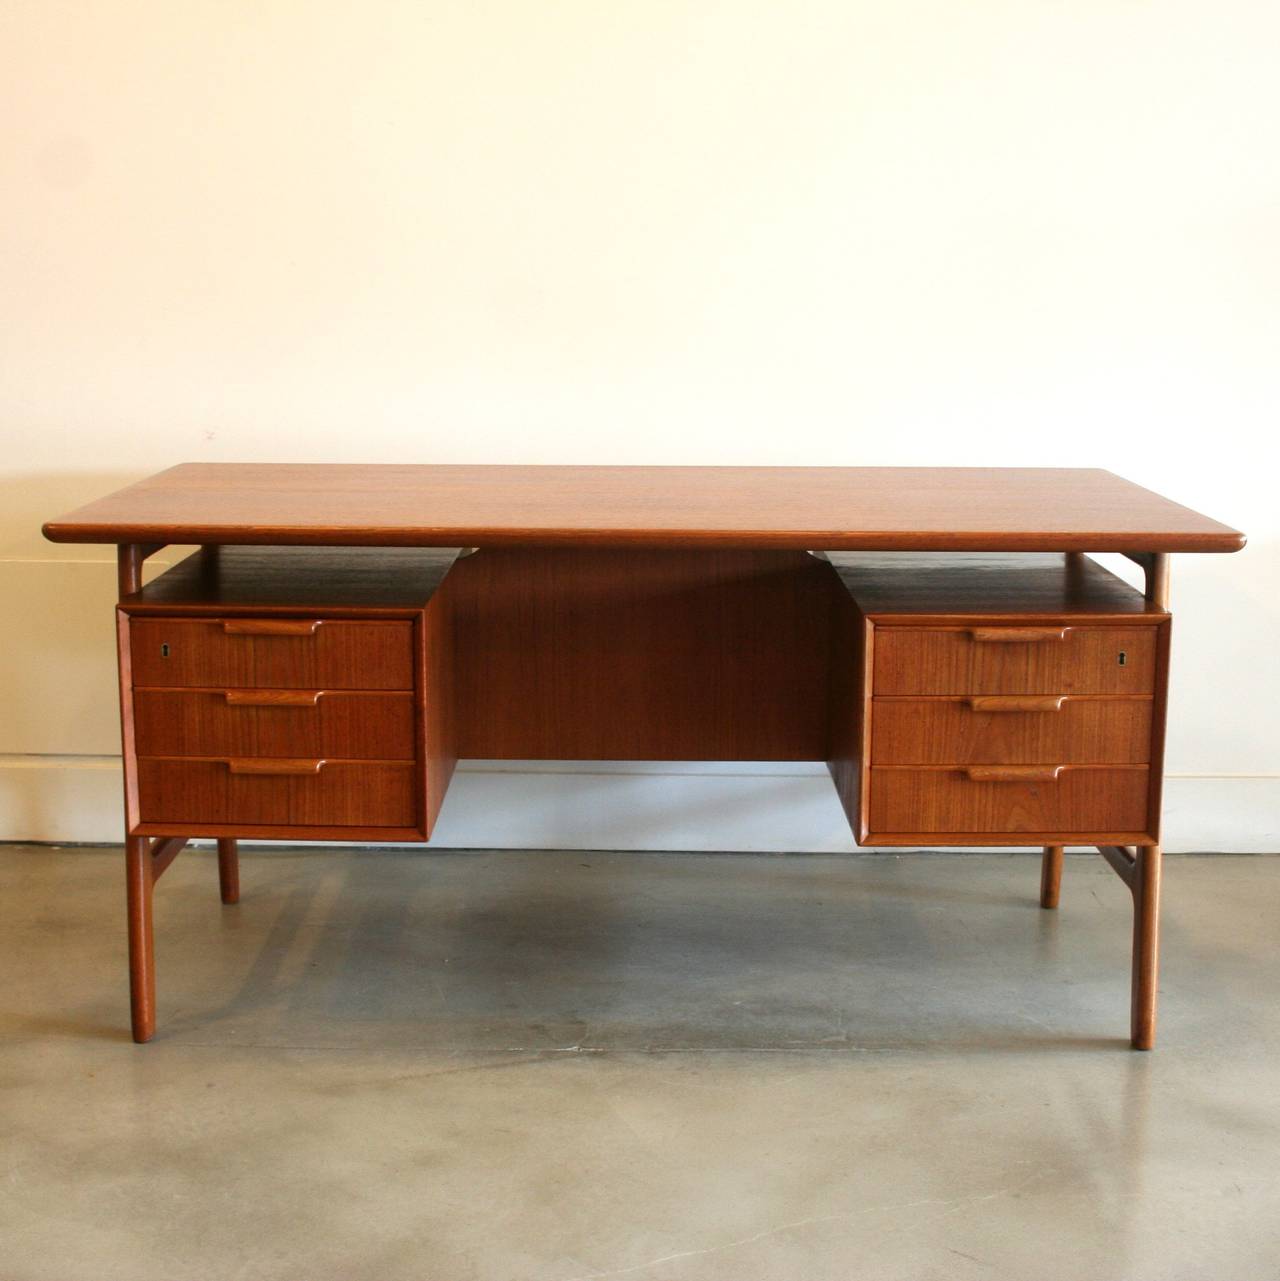 Stunning original teak desk designed by Gunni Omann, circa 1950's. This piece is highly functional and beautiful to look at. Rounded edges and sculptural A-frame leg design create an organic aesthetic, while six dove-tailed drawers and rear drop